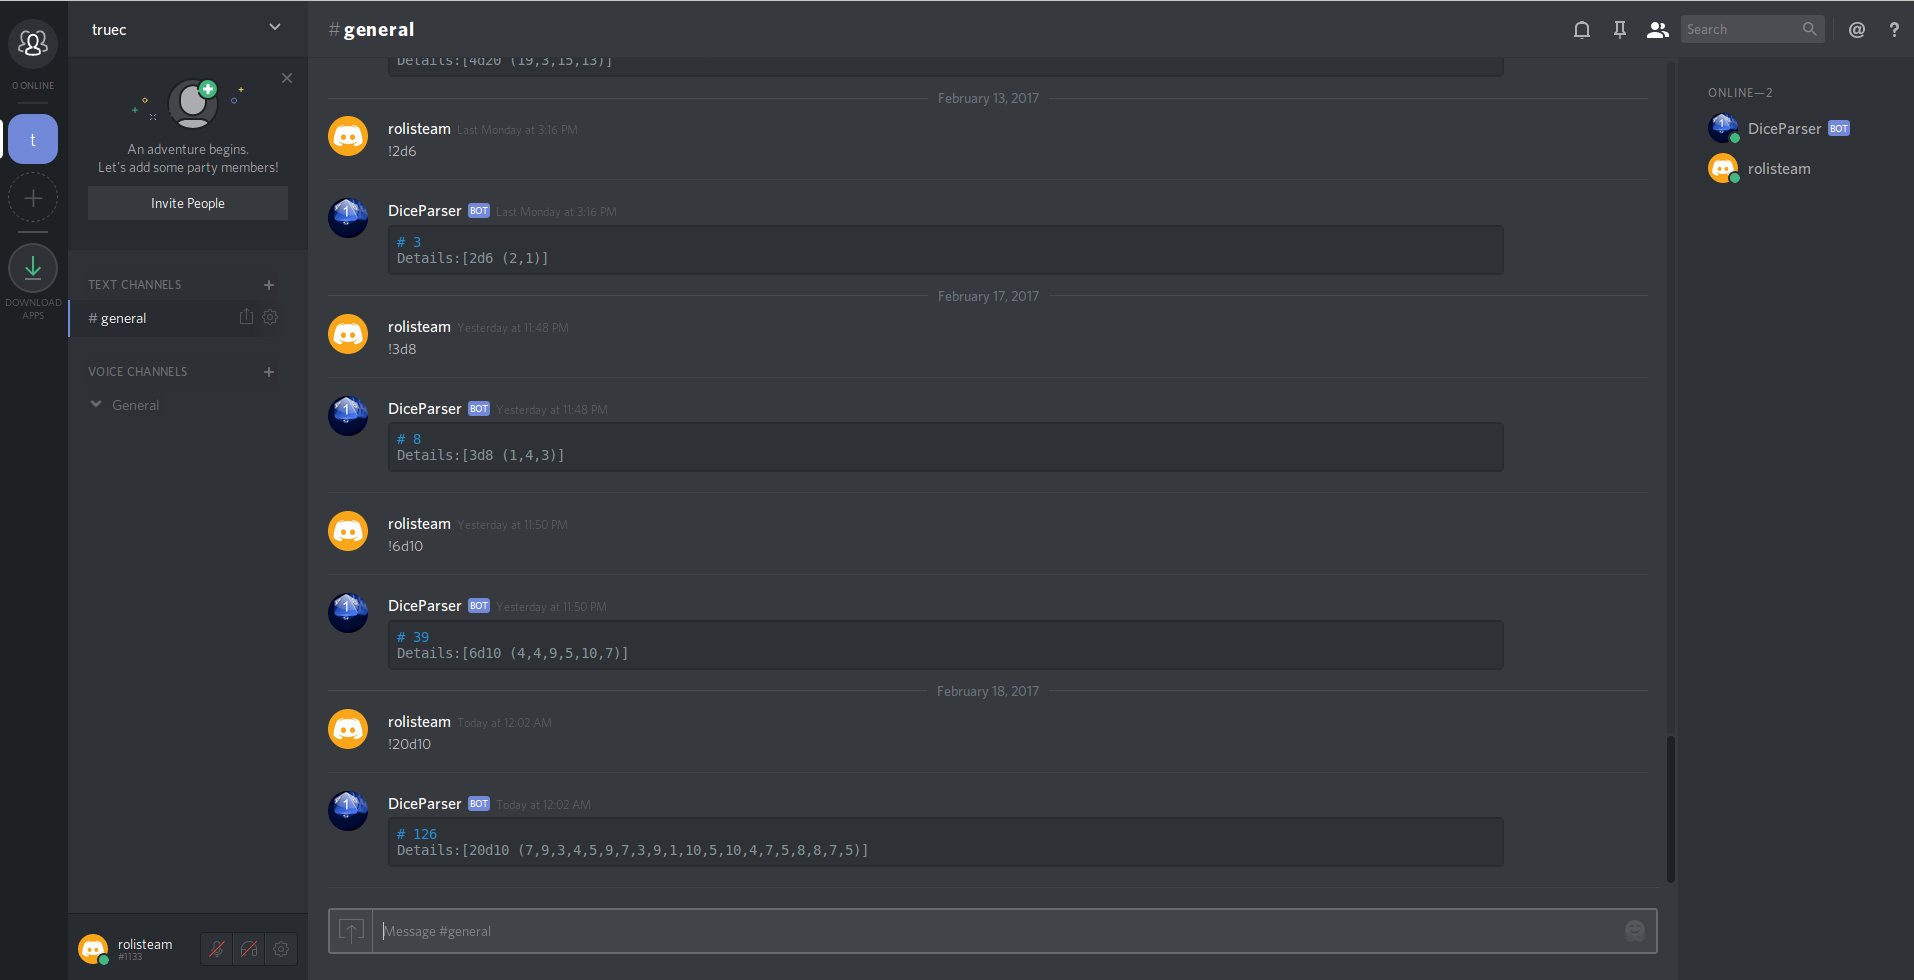 Add bot to discord group chat